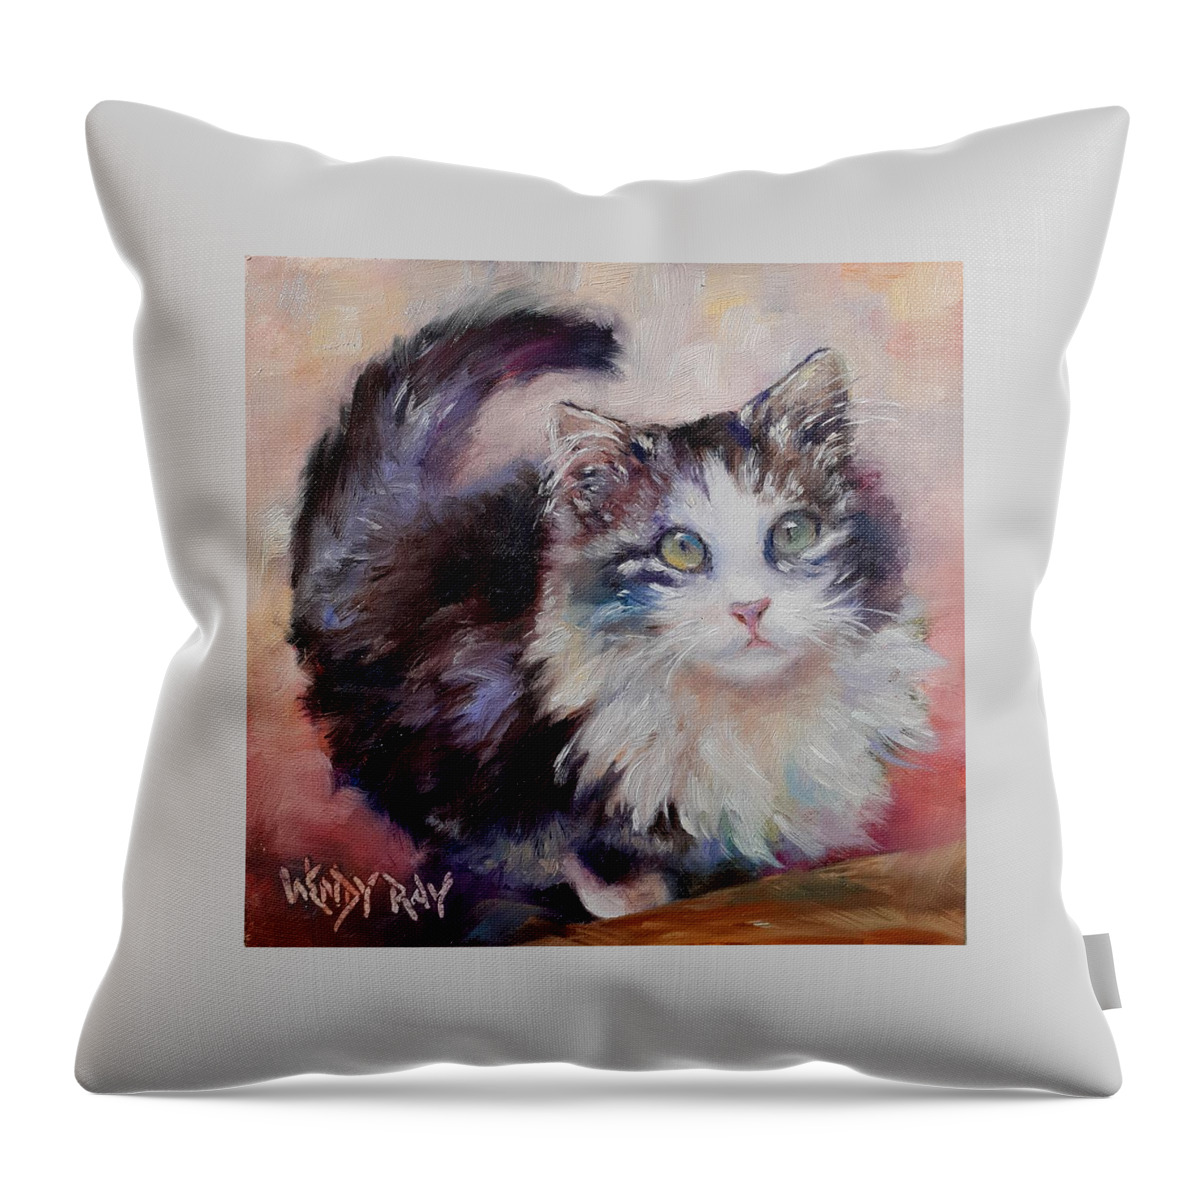 Cat Throw Pillow featuring the painting Green Eyes by Wendy Ray